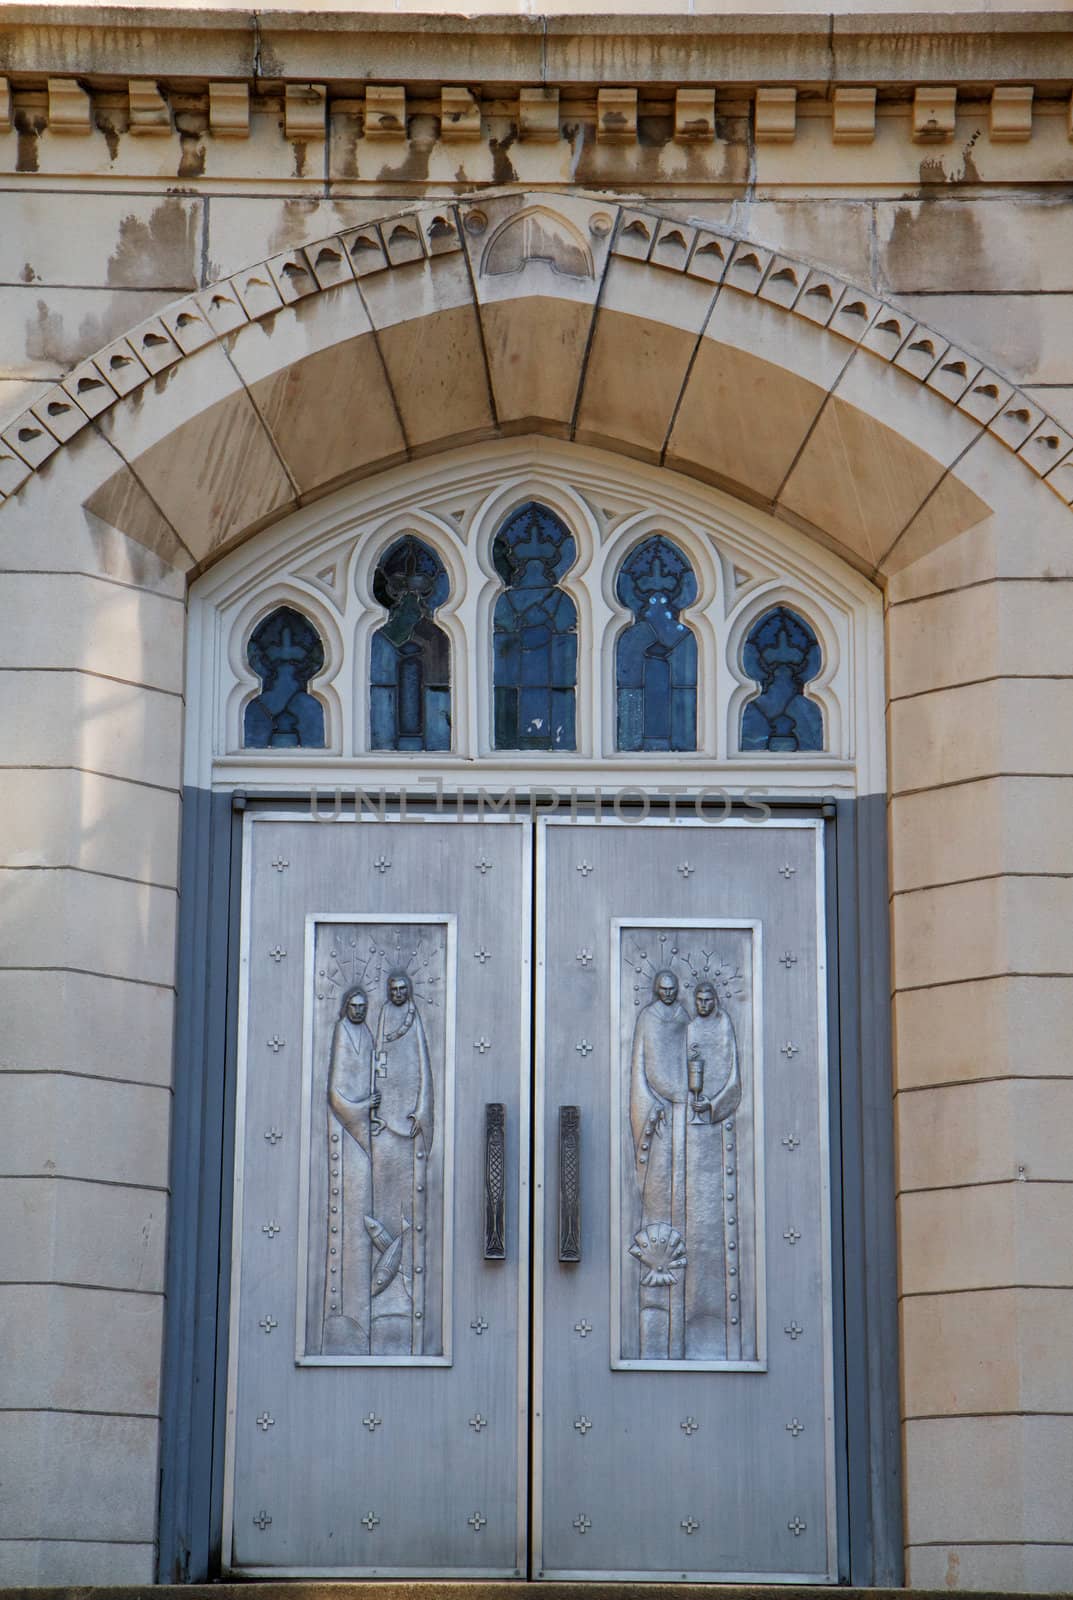 Engraves metal chruch doors with concrete steps